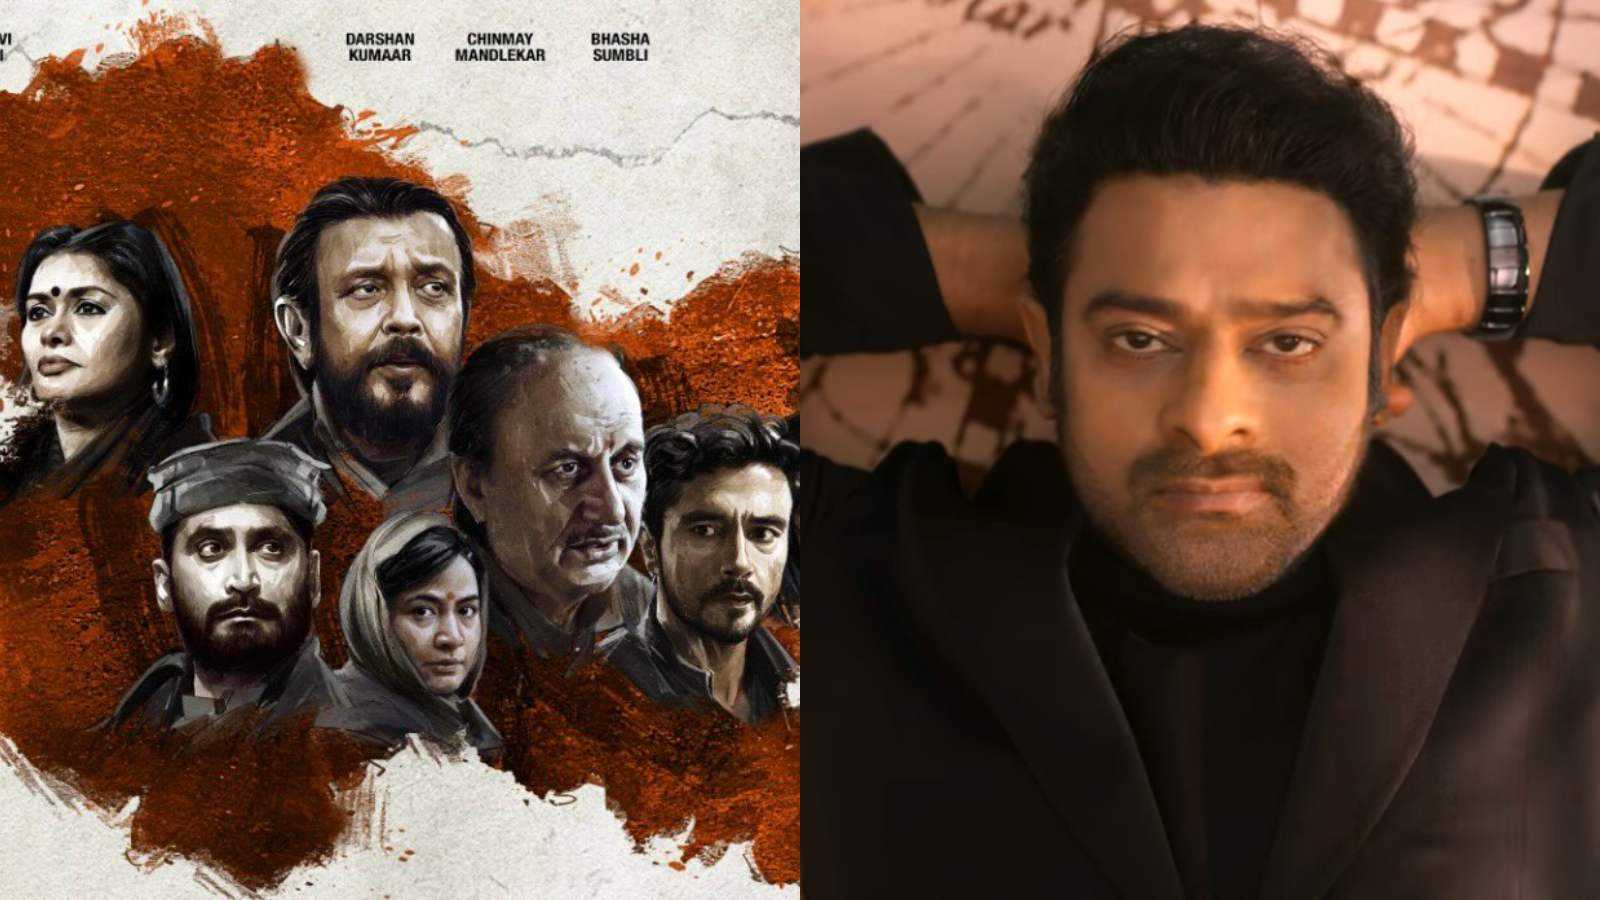 The Kashmir Files off to a promising start at the box office; Radhe Shyam has a dull opening day